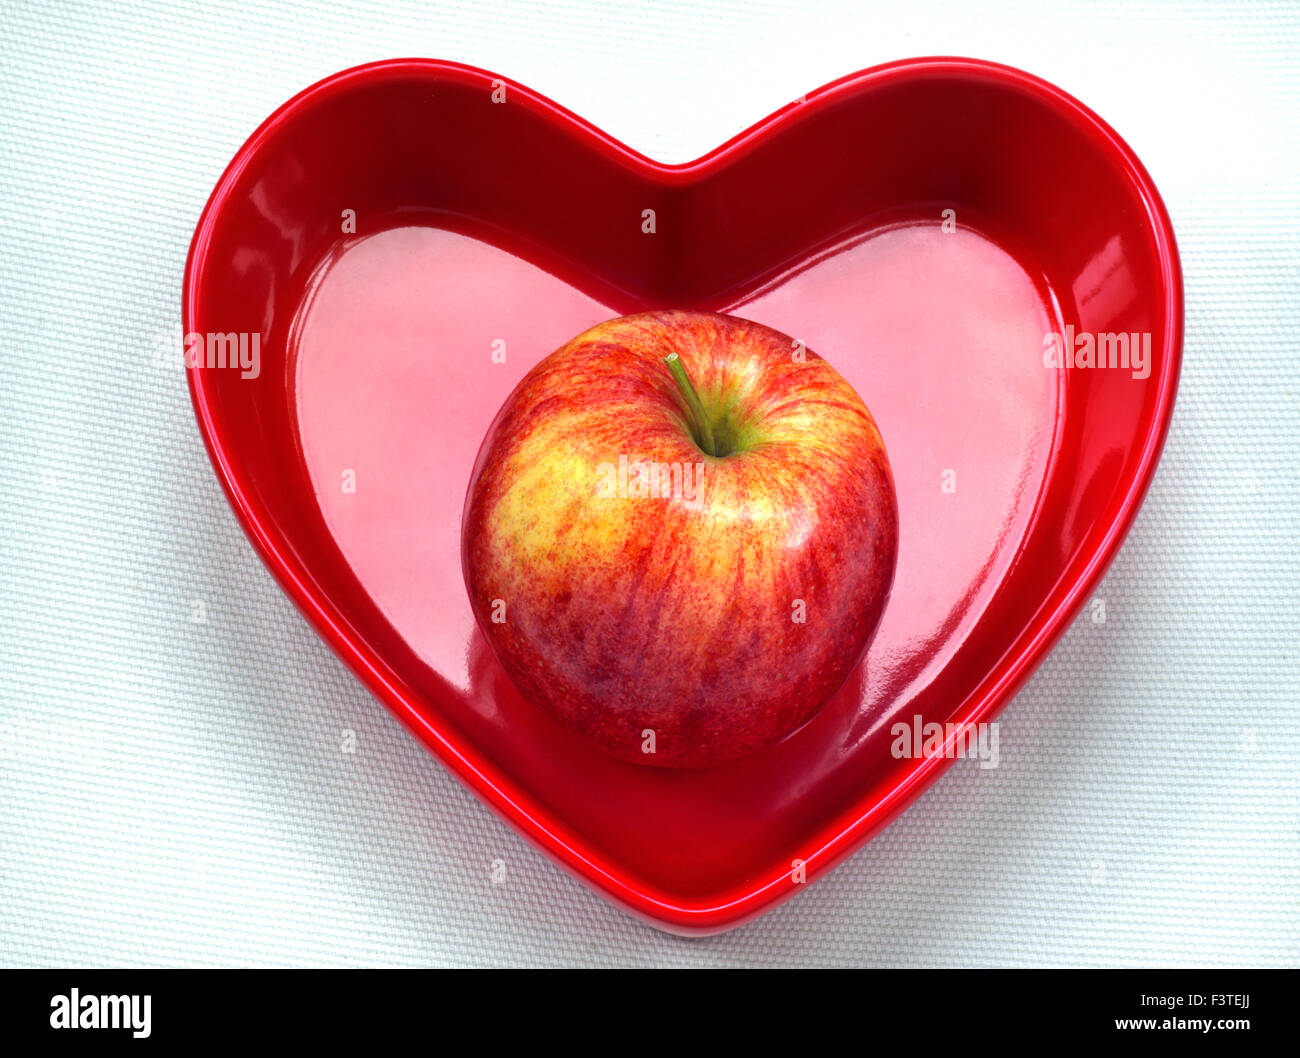 GALA APPLE HEART DISH Healthy eating concept / Perfect unmarked shiny sweet Gala Apple in red heart shaped dish on white background Stock Photo